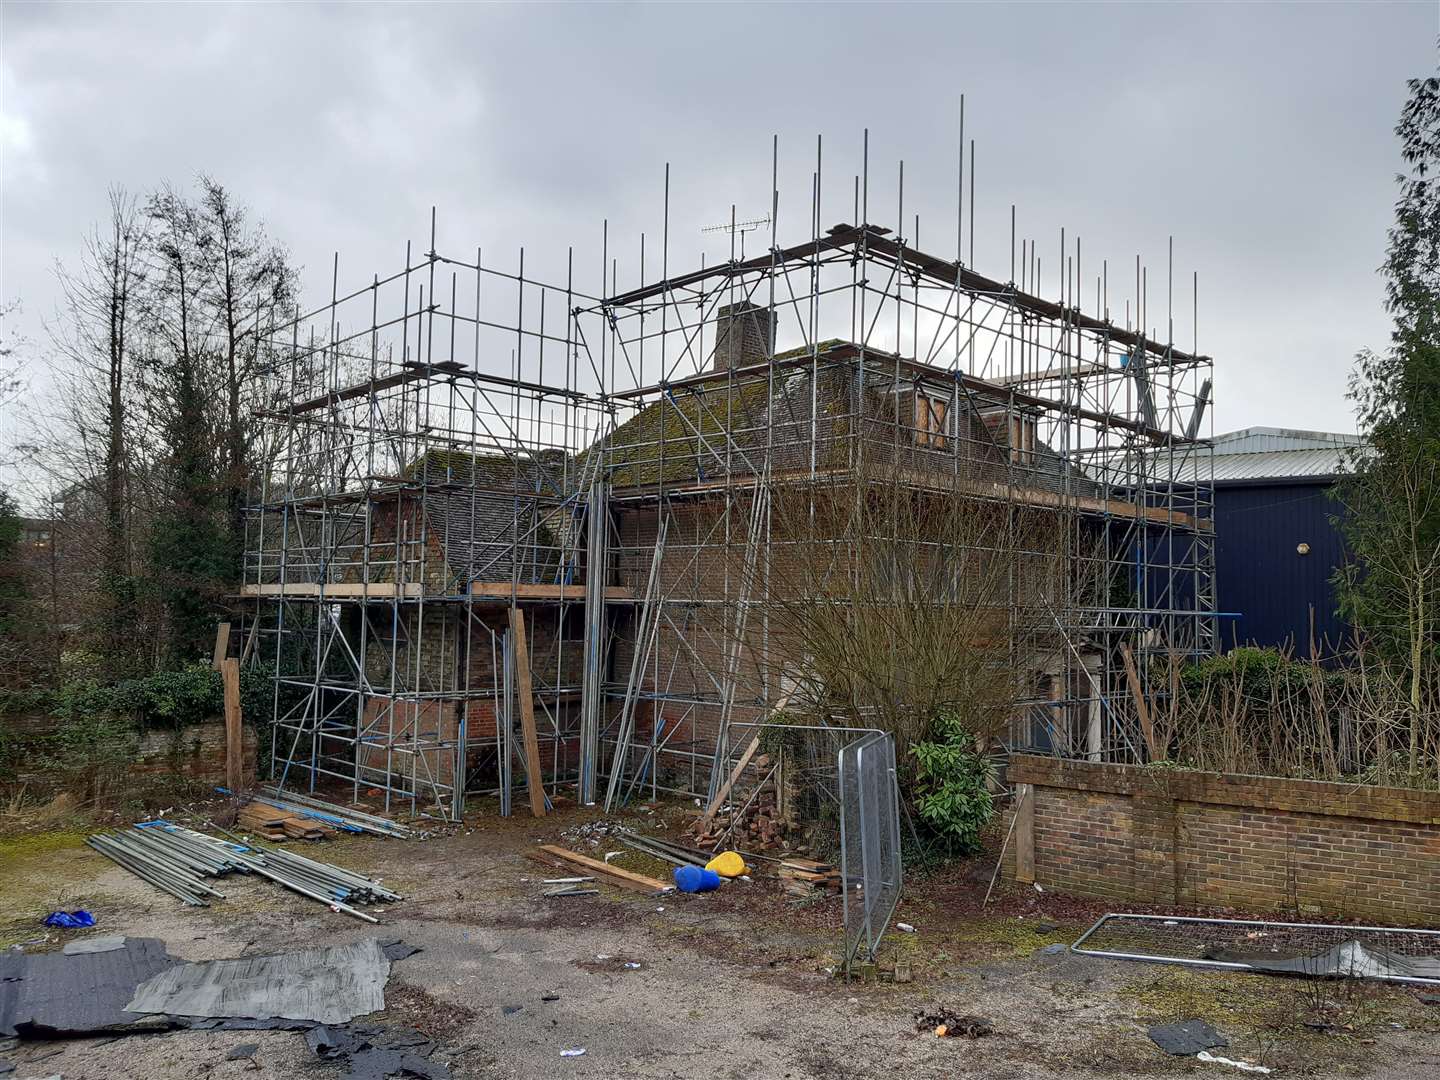 Whist House is now surrounded by scaffolding